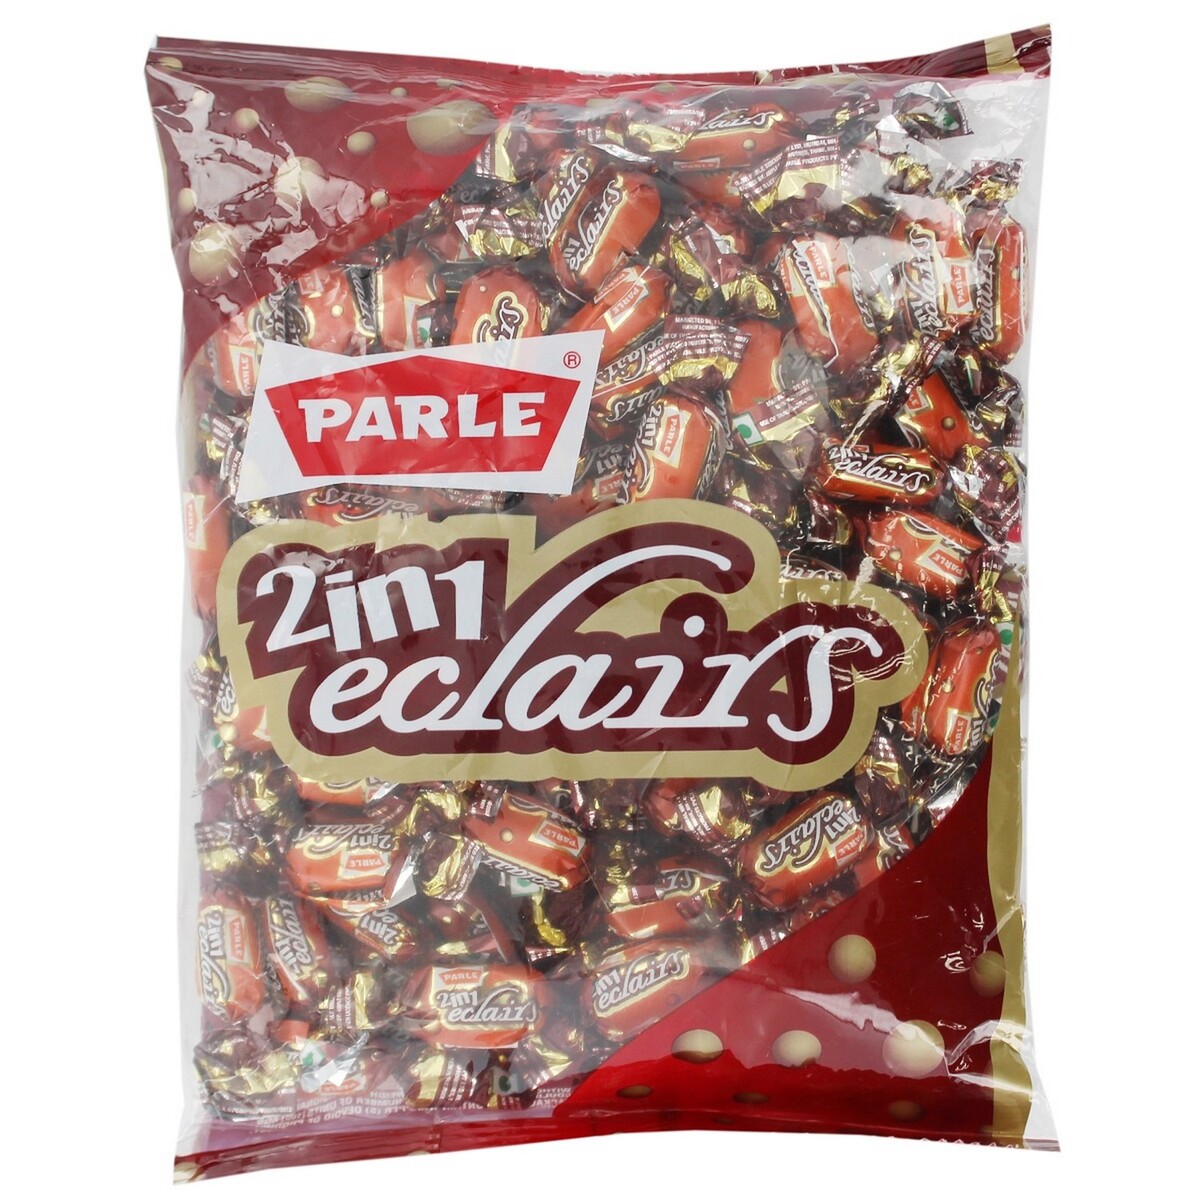 Parle 2 in 1 Eclairs 277g